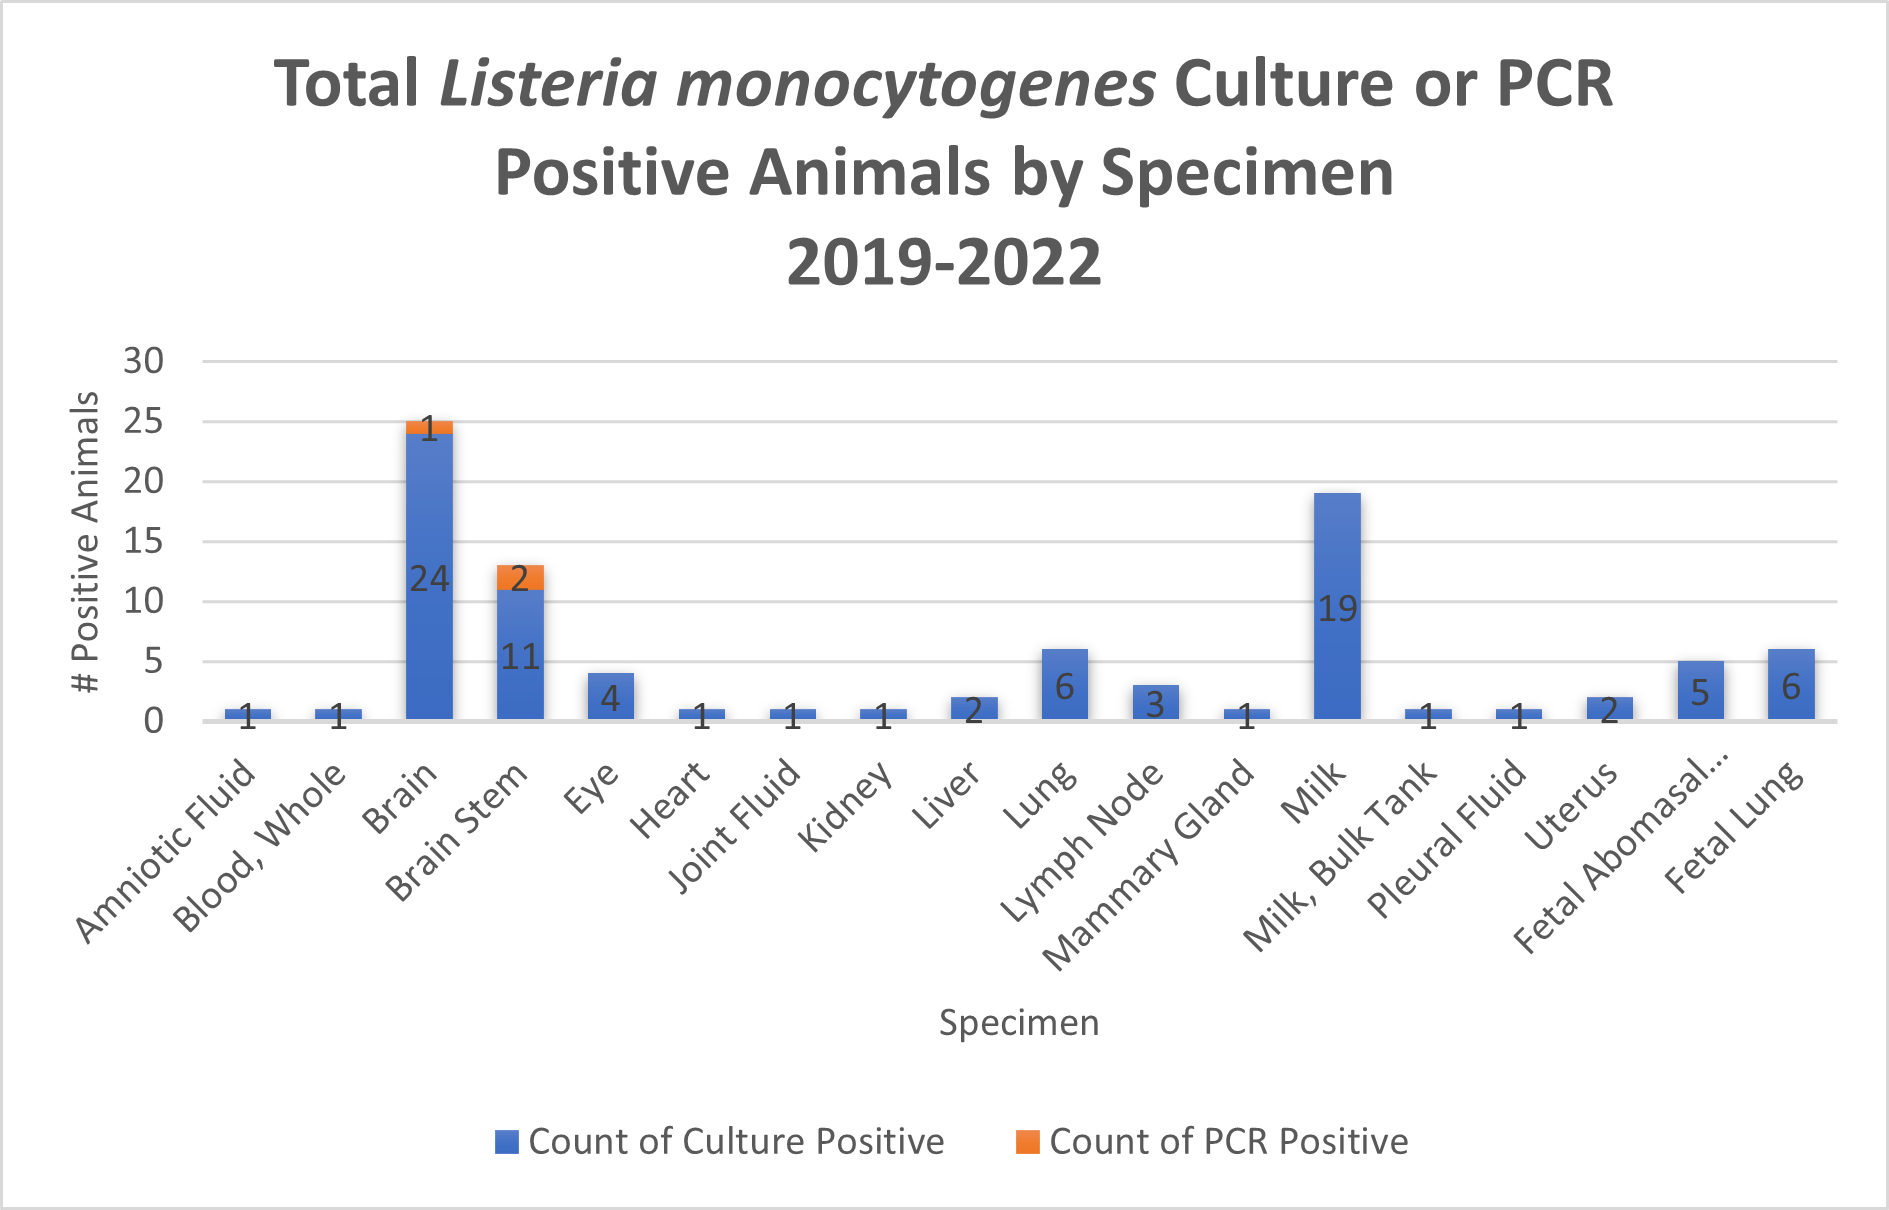 Specimens used to detect Listeria monocytogenes from the positive animals received by the Cornell Animal Health Diagnostic Center from 2019-2022.  